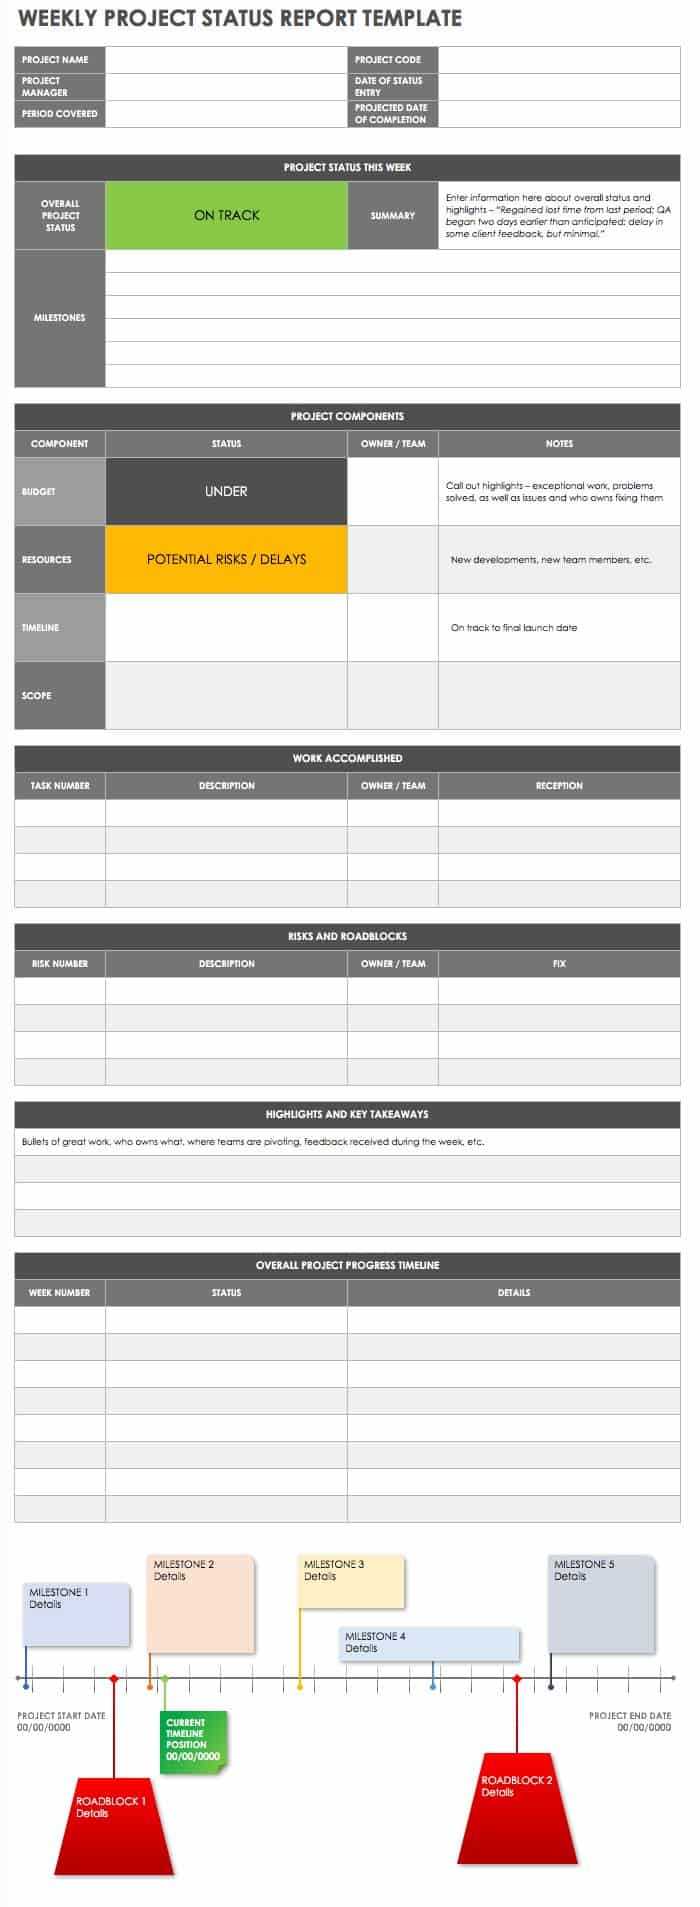 Free Project Report Templates | Smartsheet Inside Executive Summary Project Status Report Template